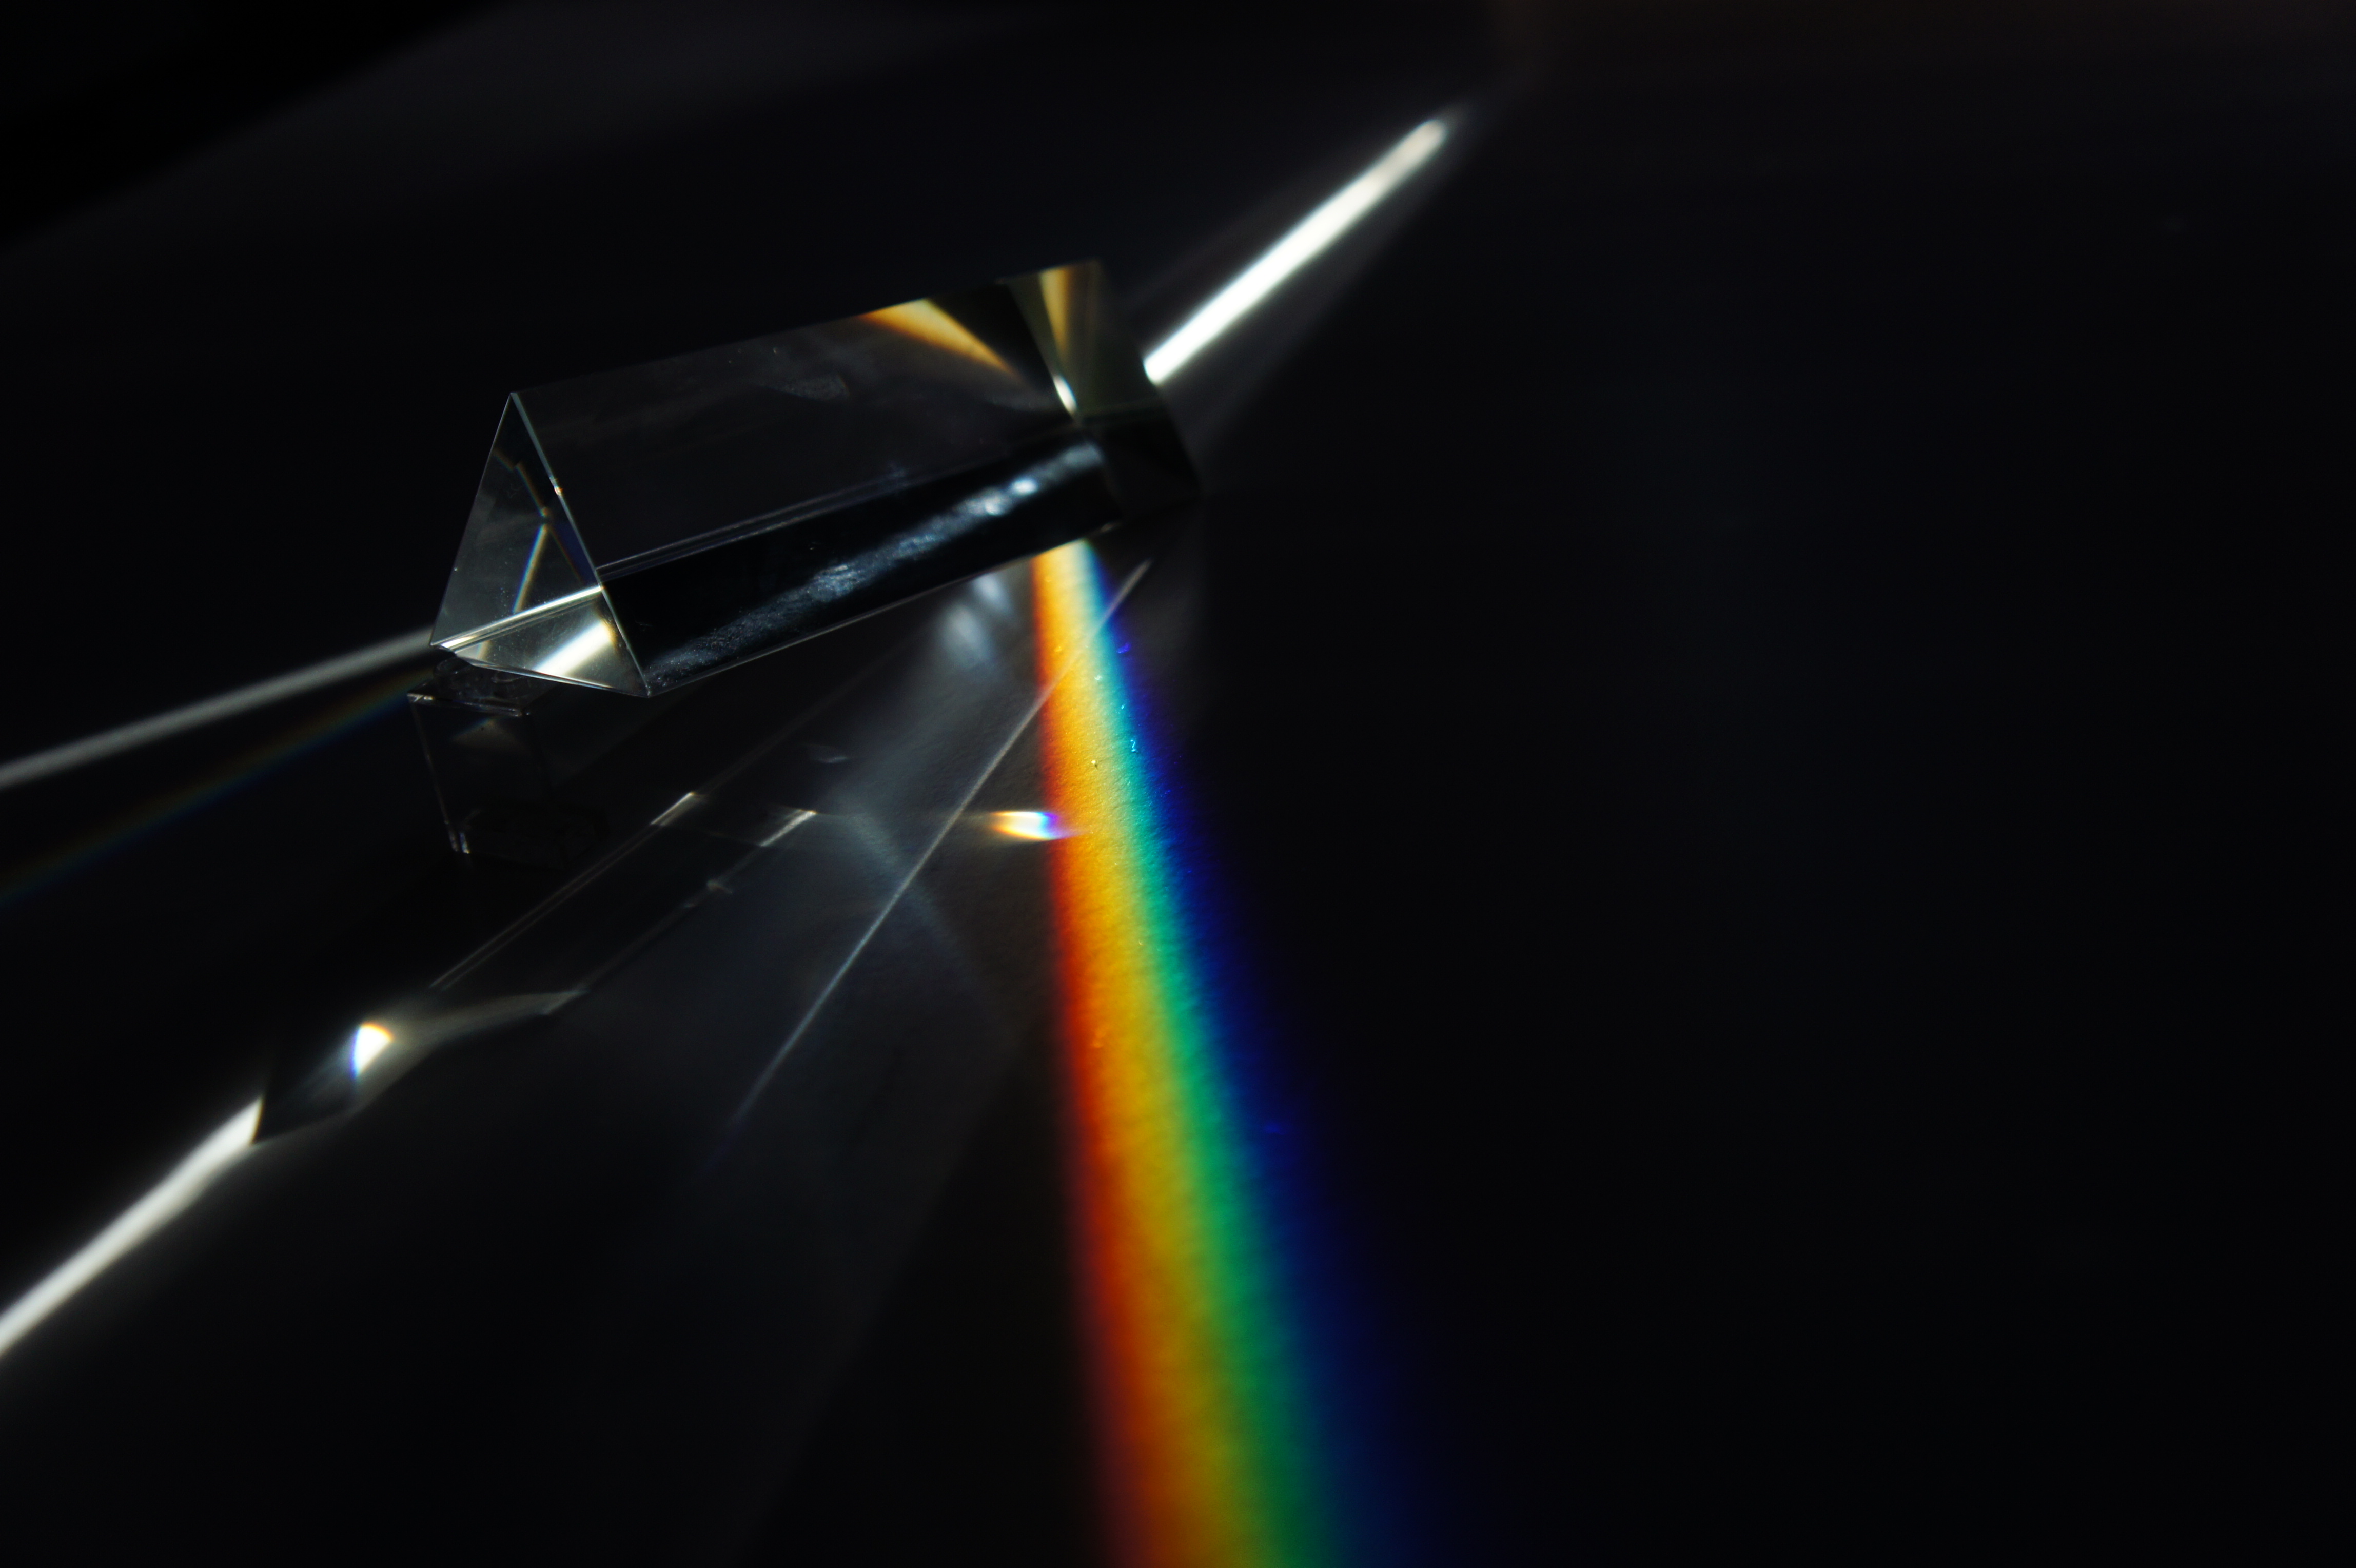 Prism Flat Rainbow from Wikimedia Commons